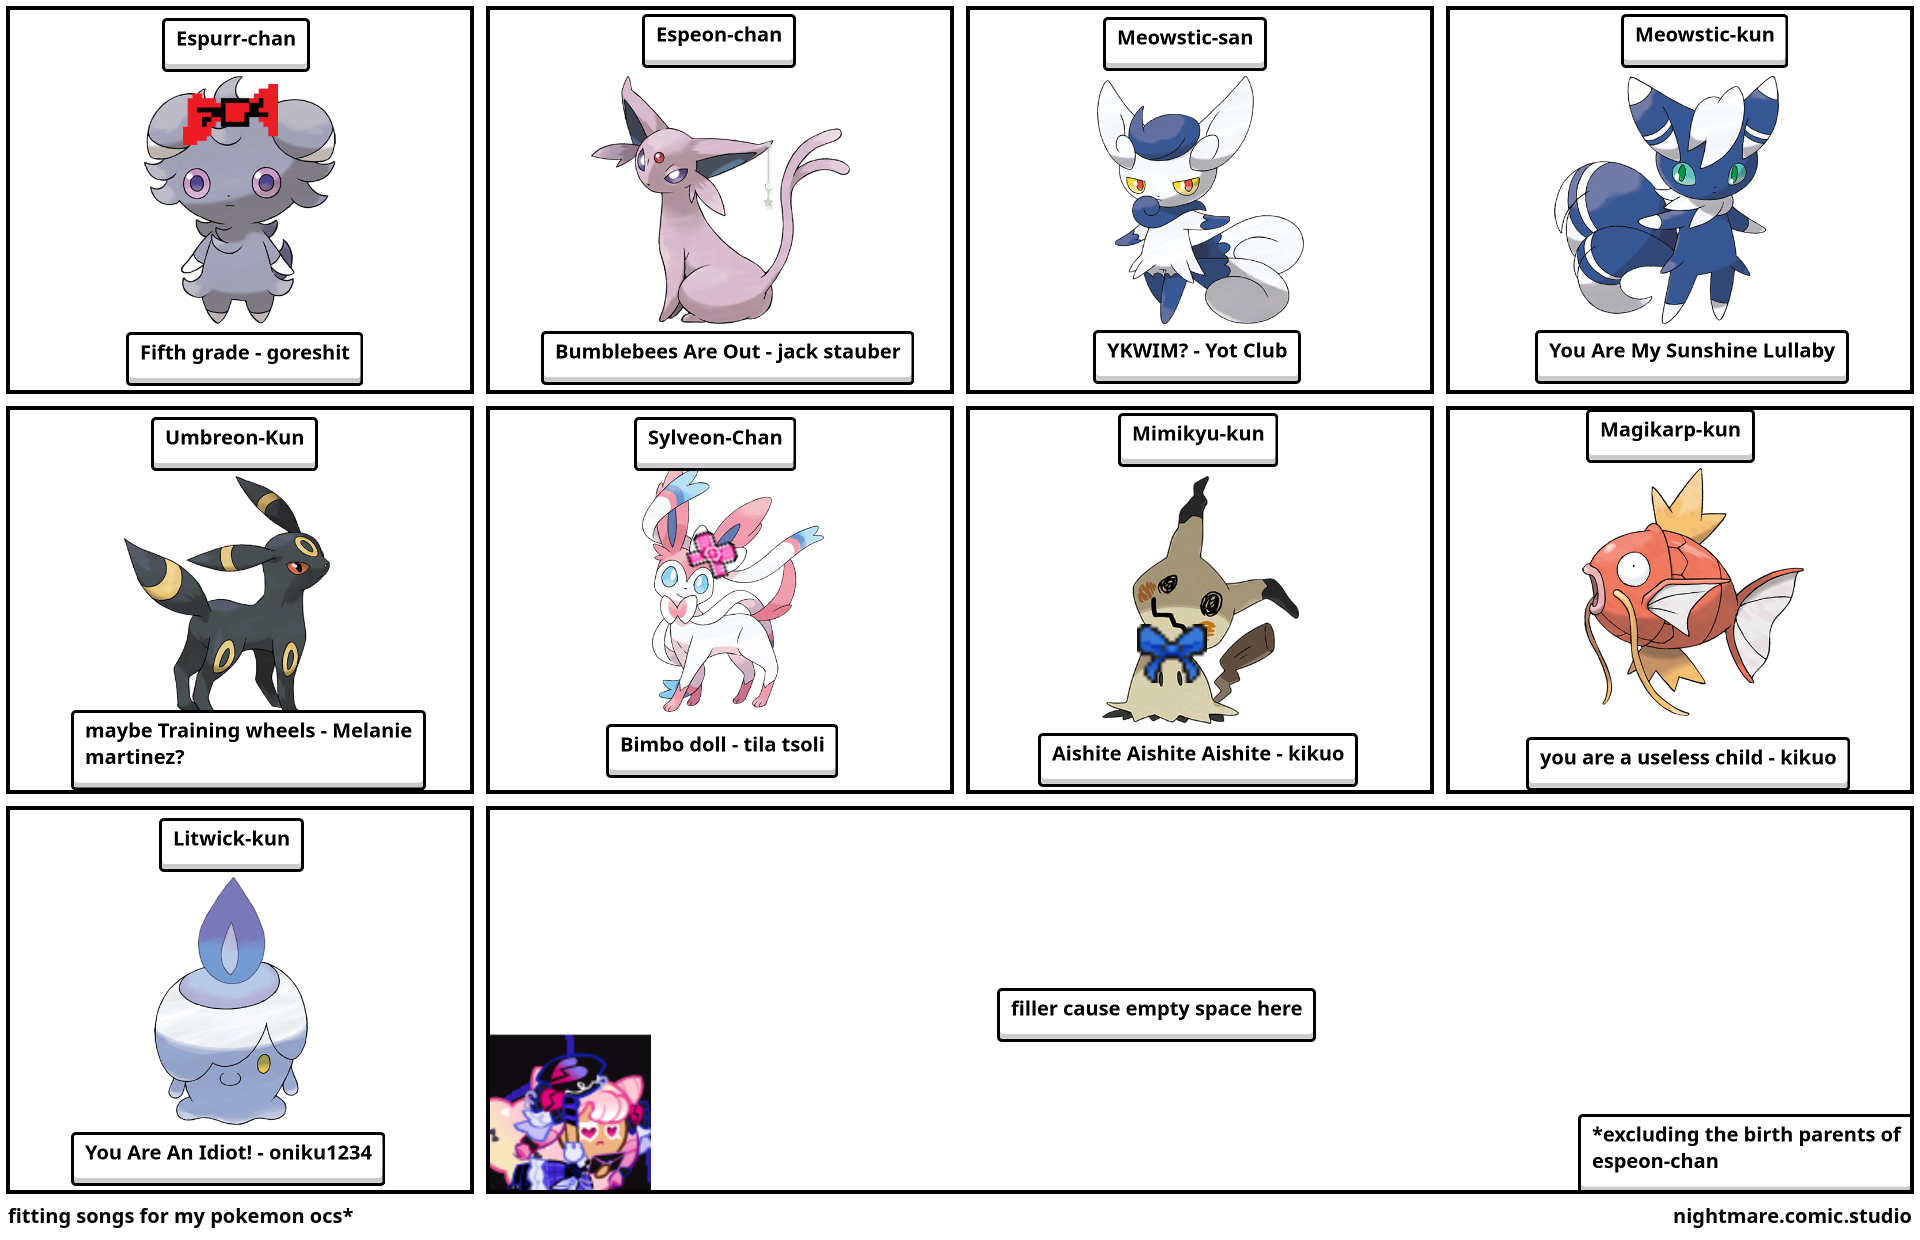 fitting songs for my pokemon ocs*